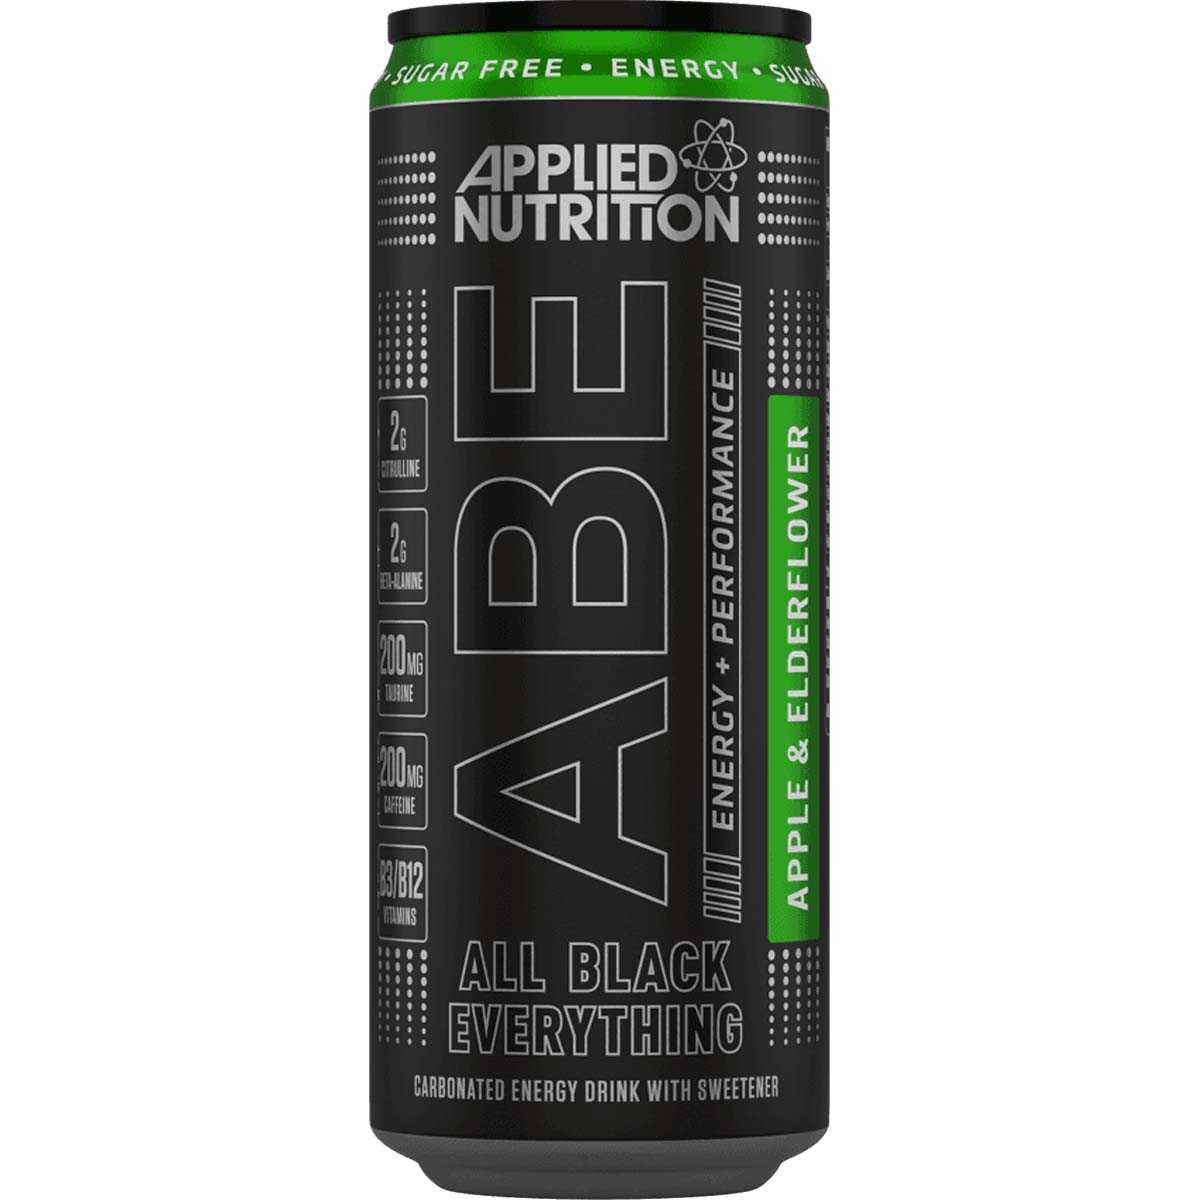 Applied Nutrition ABE Drink